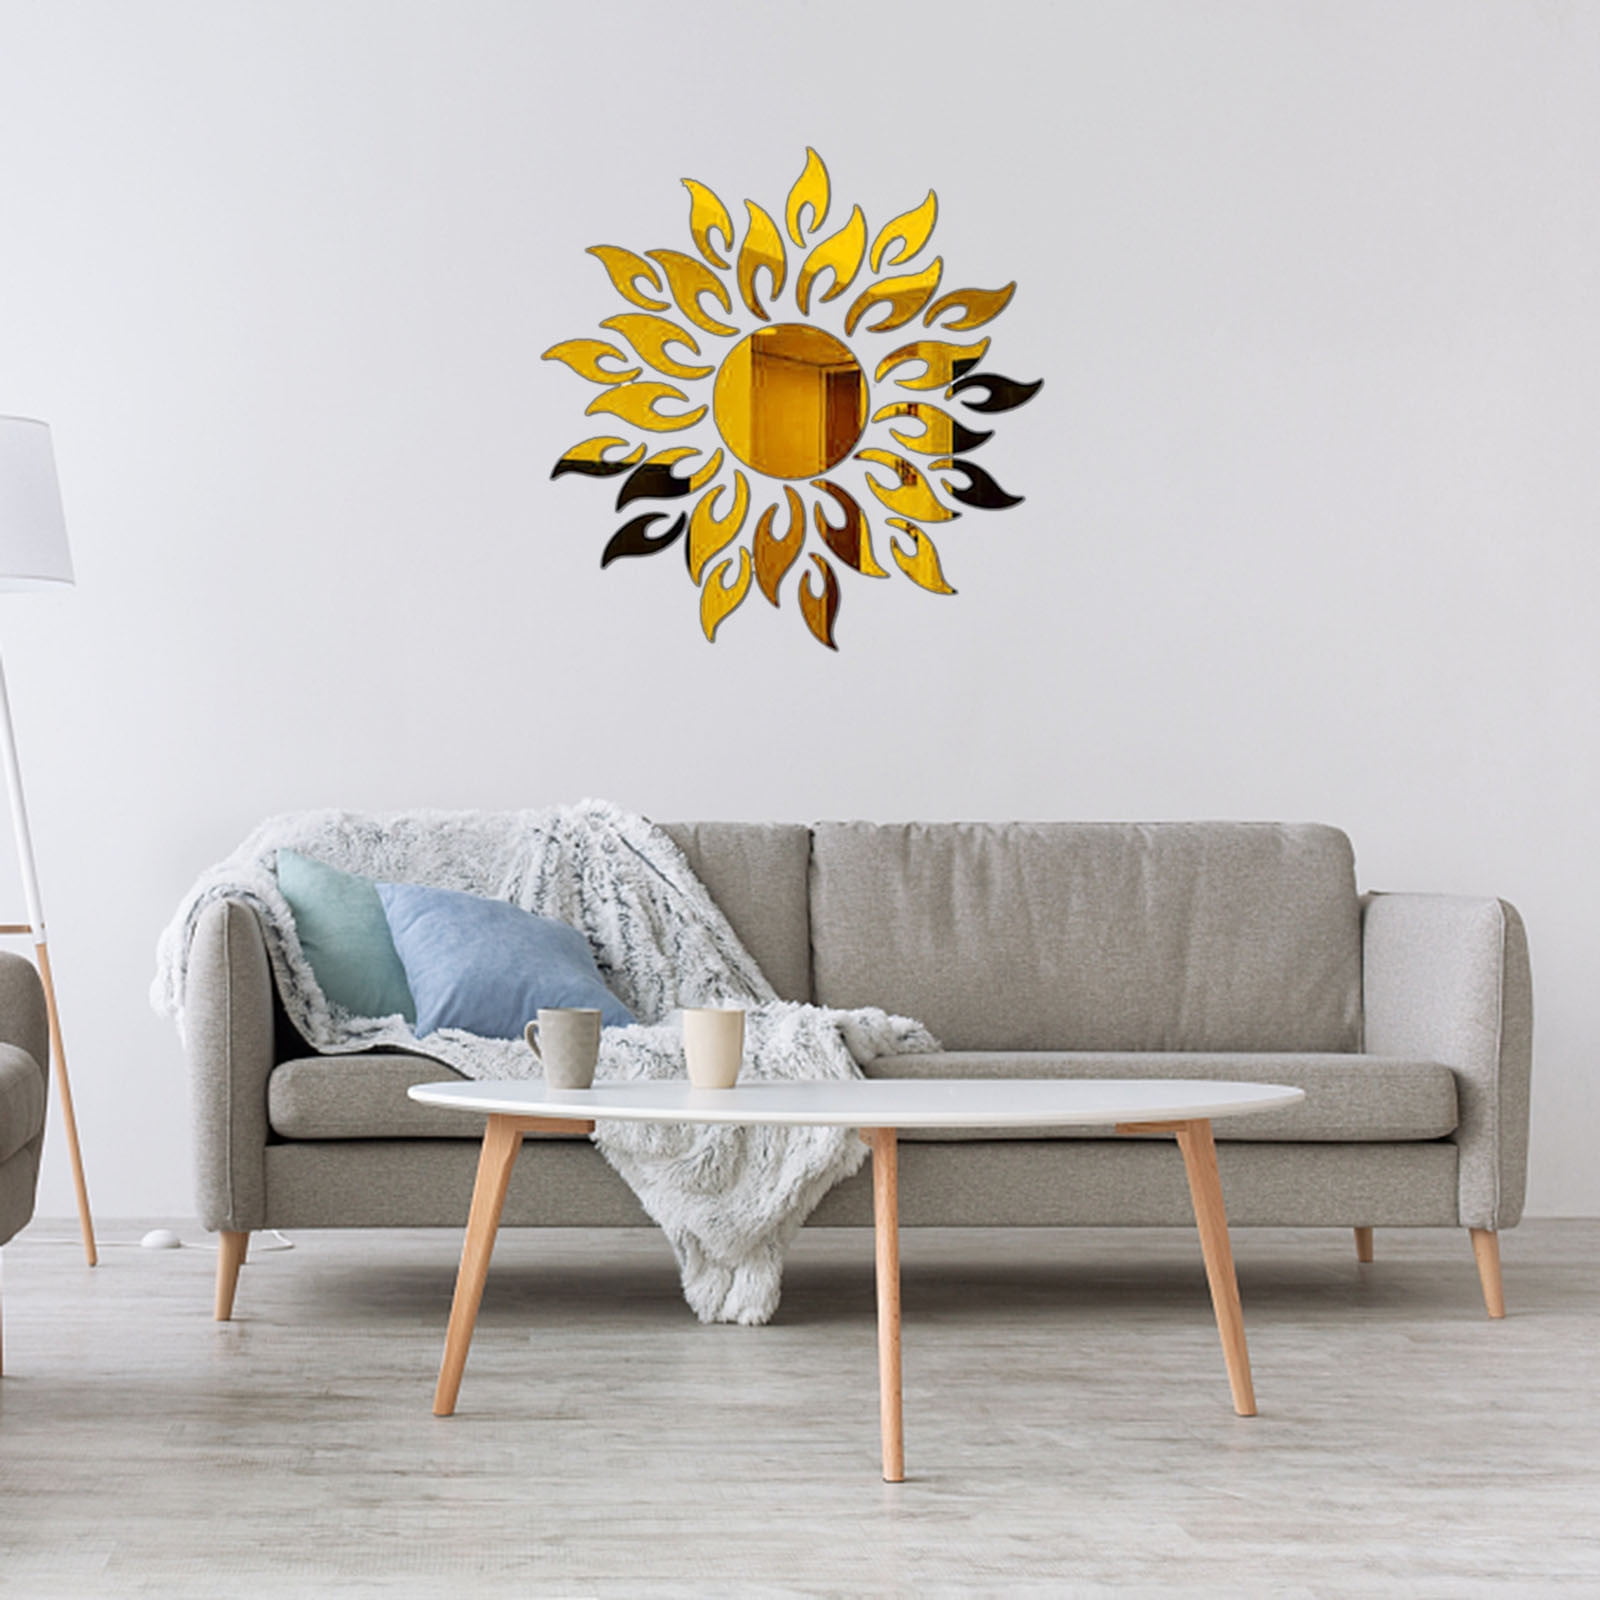 3D Adhesive Acrylic Sunflower Mural Mirror Wall Sticker Home Room Mosaic Decal 